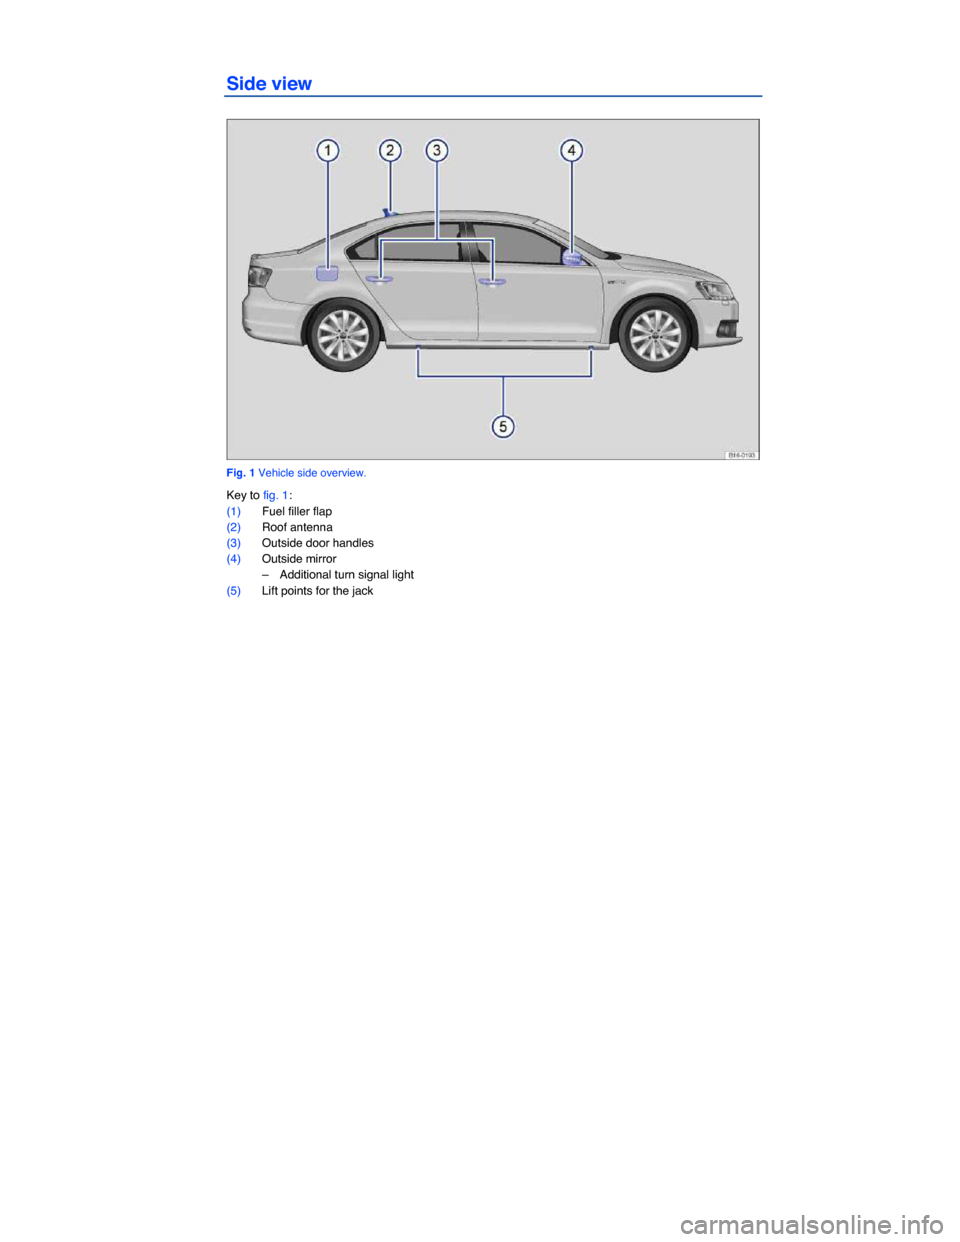 VOLKSWAGEN JETTA HYBRID 2014 1B / 6.G Owners Manual  
Side view 
 
Fig. 1 Vehicle side overview. 
Key to fig. 1: 
(1) Fuel filler flap  
(2) Roof antenna  
(3) Outside door handles  
(4) Outside mirror  
–  Additional turn signal light  
(5) Lift poi